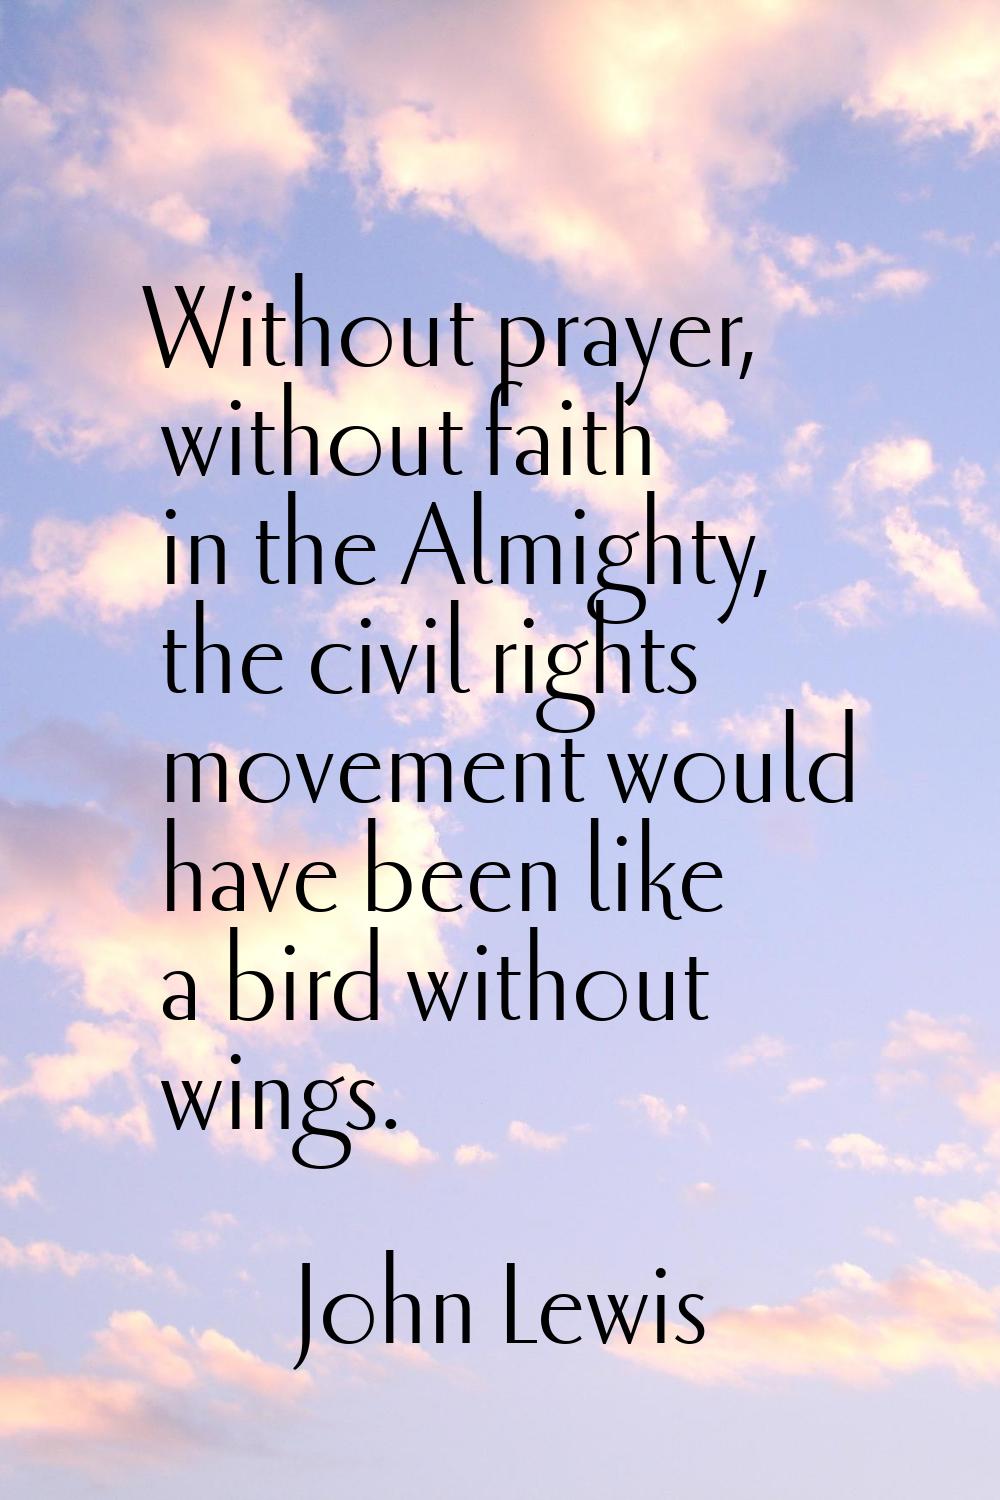 Without prayer, without faith in the Almighty, the civil rights movement would have been like a bir